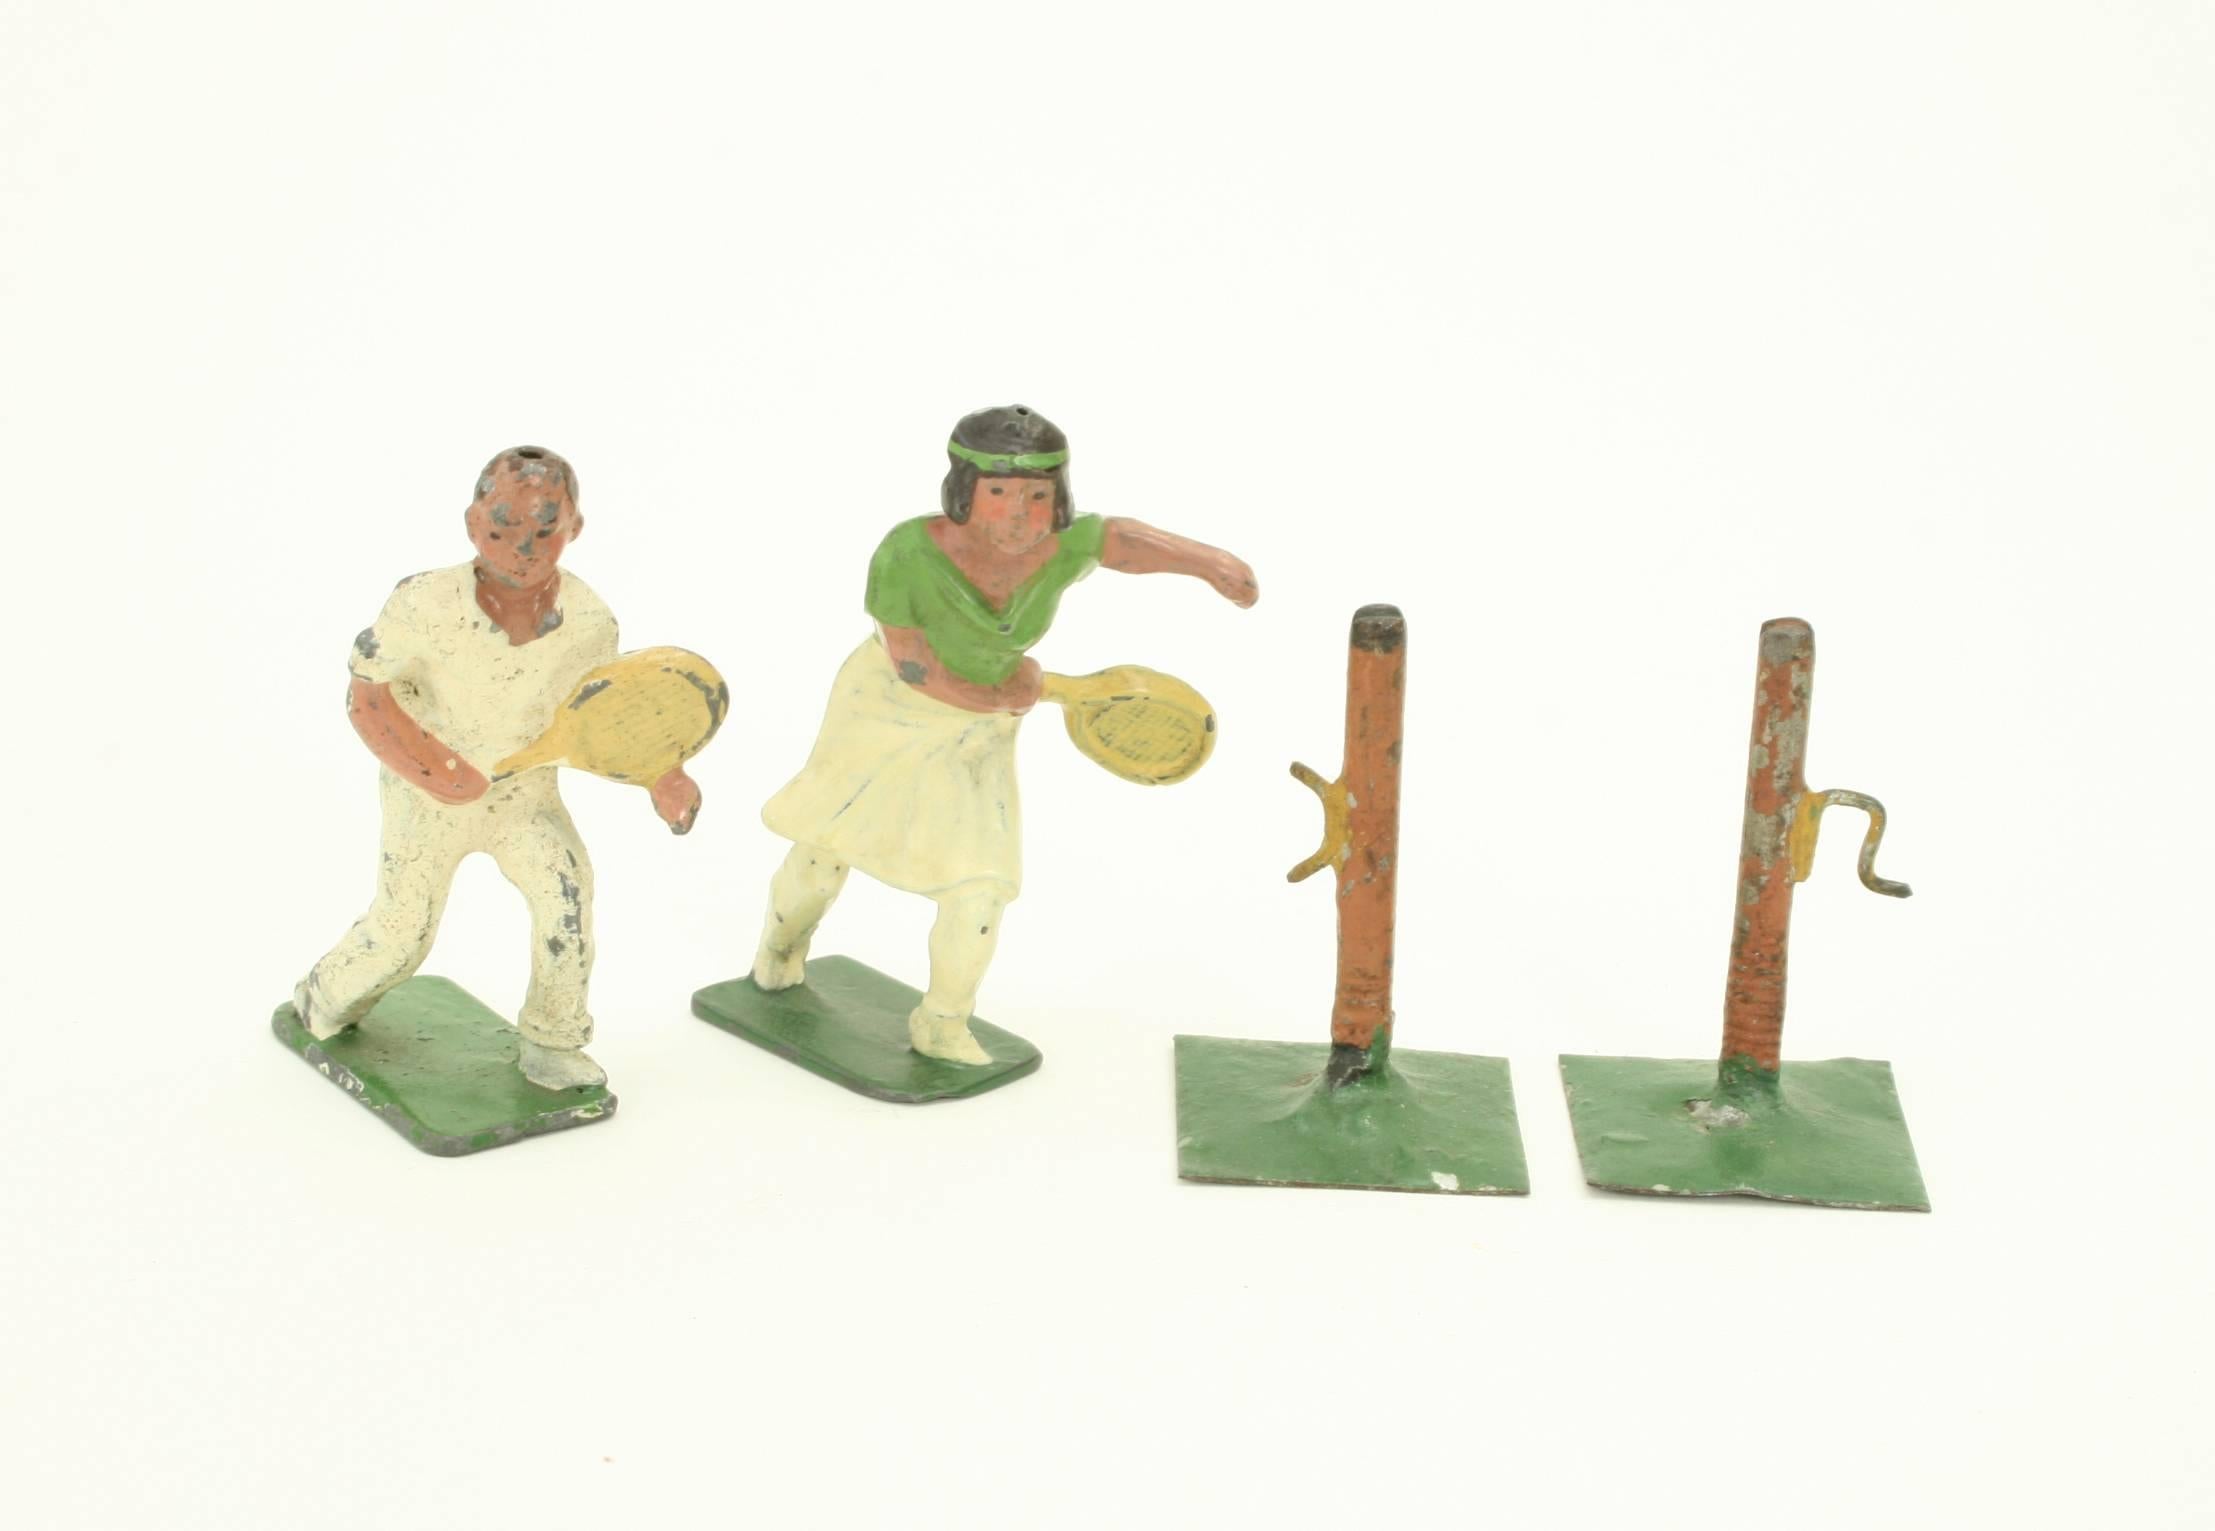 An unusual and rare set of lead tennis figures made by Johillco.
The set comprises of a male and female tennis player, in action poses holding tennis rackets, and is complete with net posts. The figures are all original with minor chipping